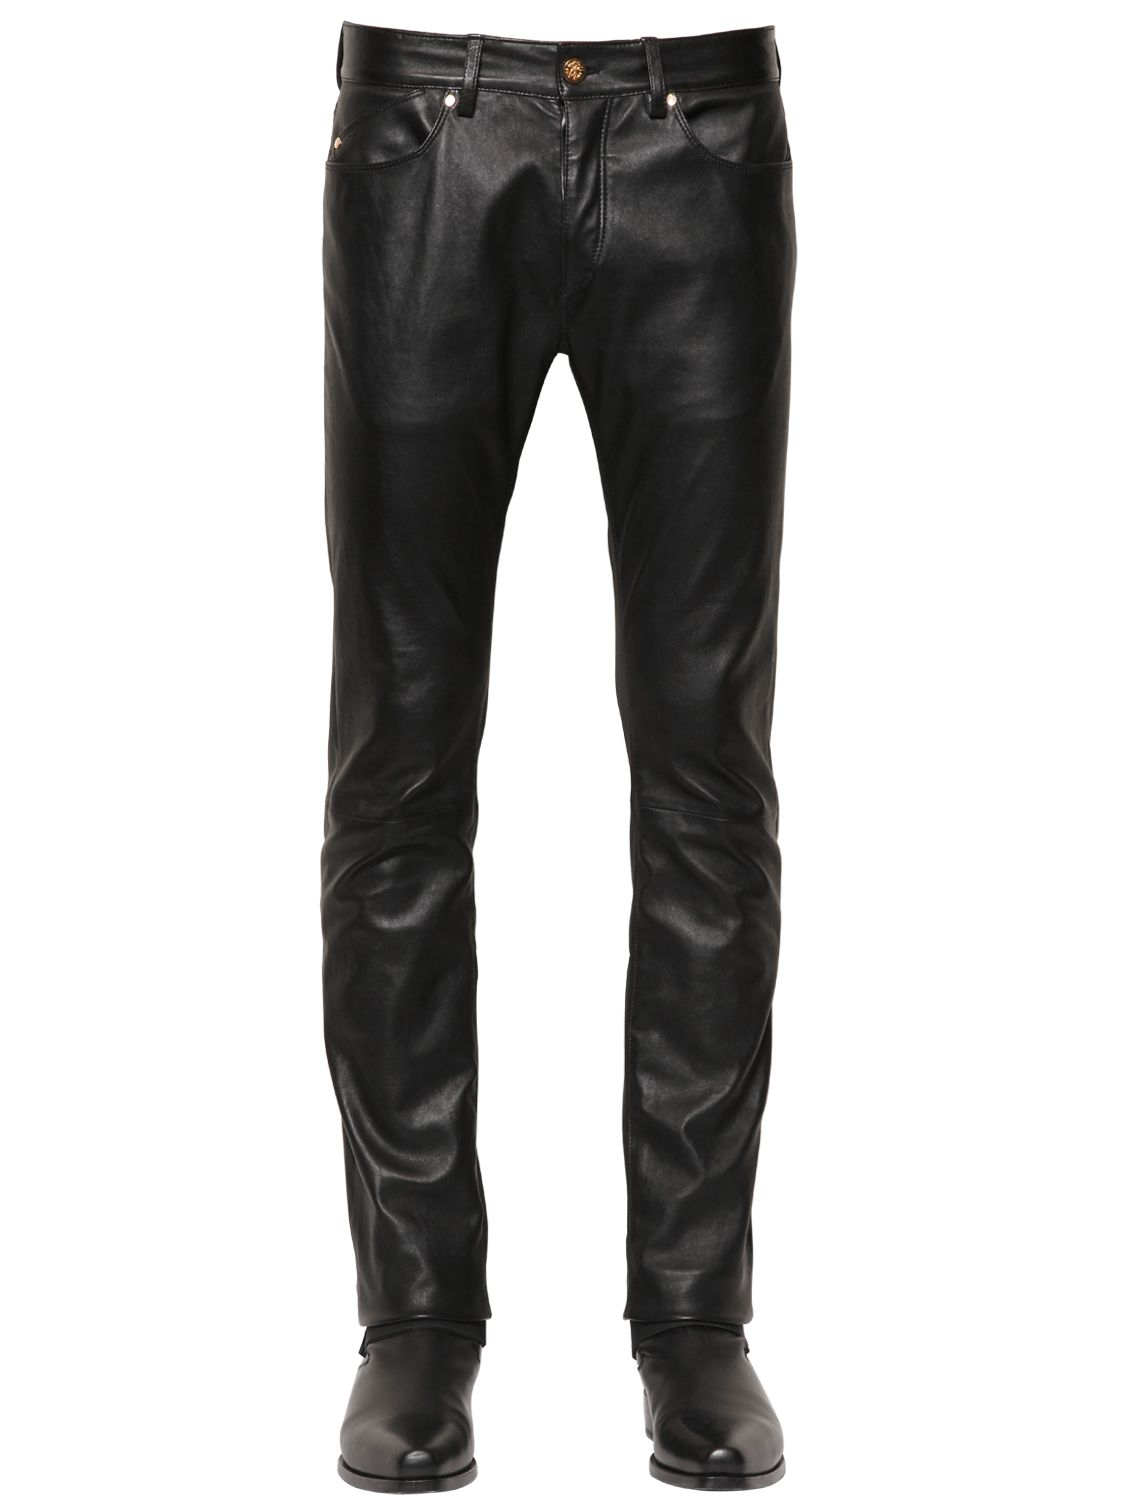 Roberto Cavalli 17cm Stretch Nappa Leather Pants in Black for Men - Lyst